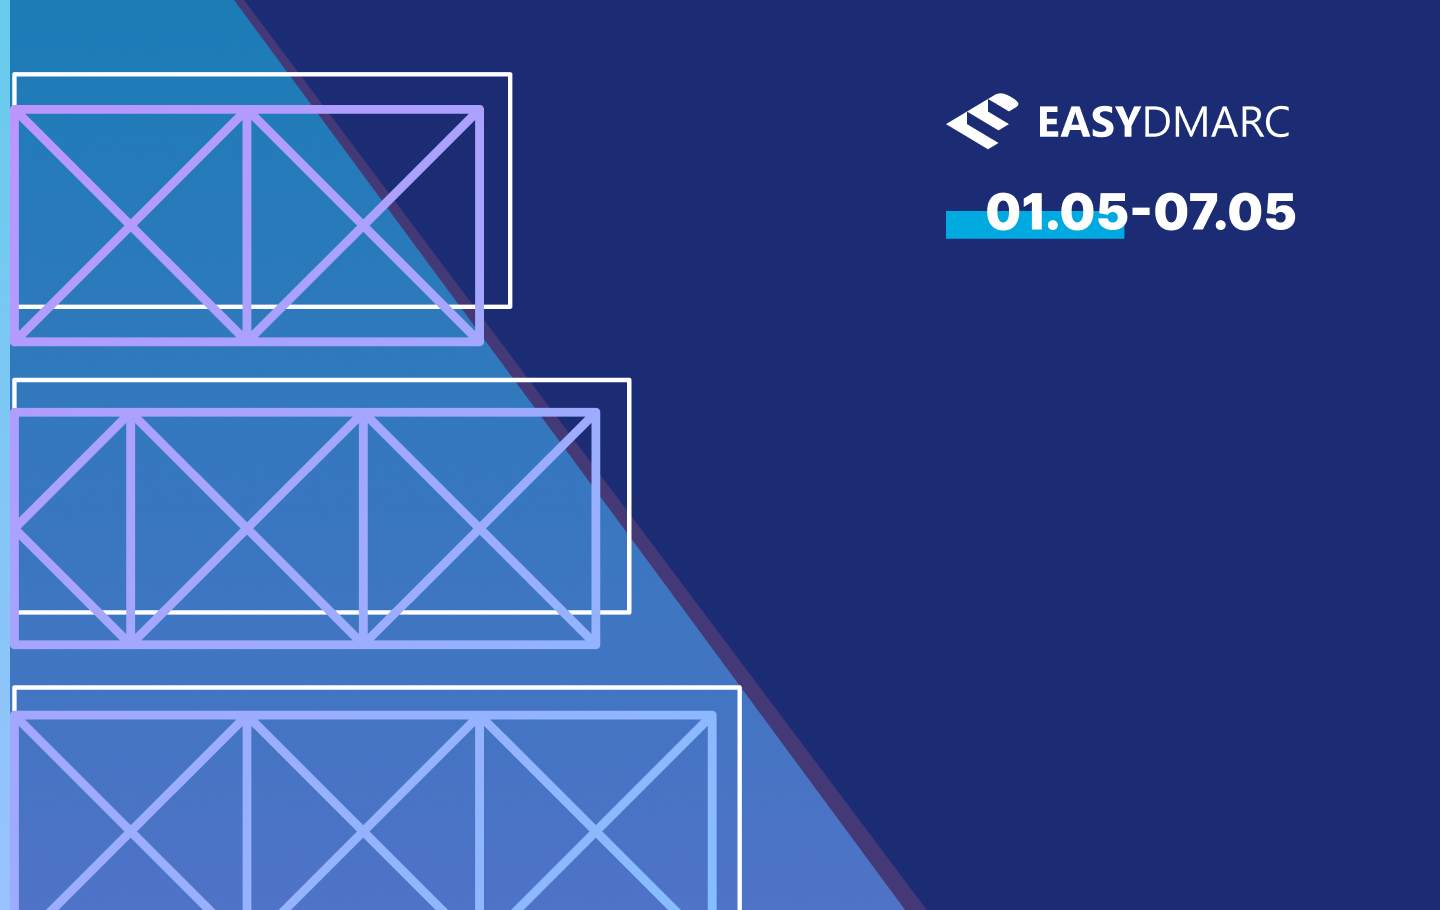 EasyDMRC logo and a date on a blue background